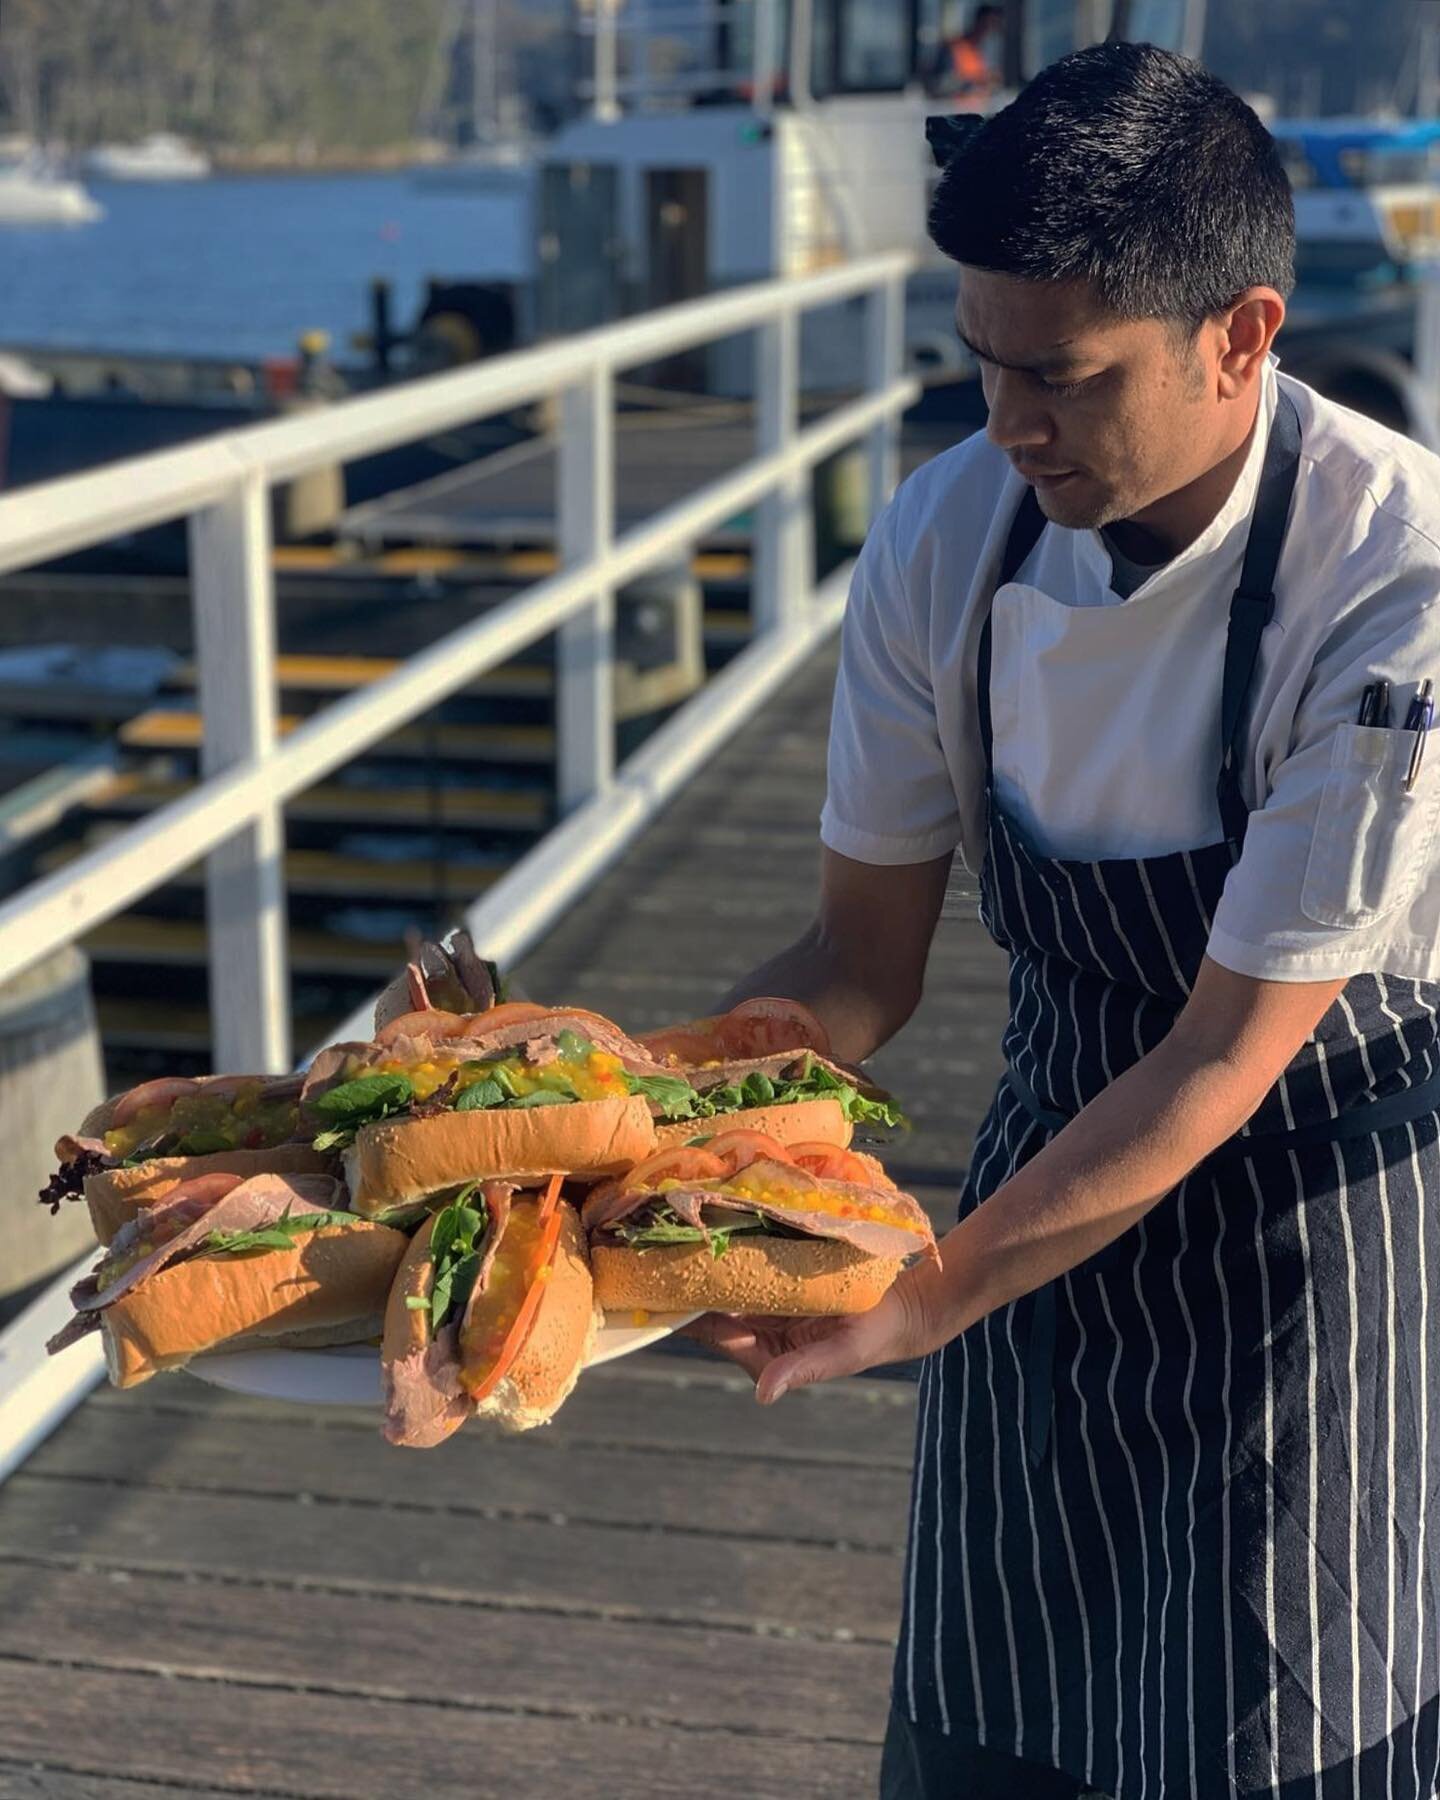 lunchtime&rsquo;s &lsquo;rolling in&rsquo; and we are ready! Takeaway &amp; sit by the water on the wharf or laze around the timber pedestrian track. It&rsquo;s a stunning day for it ✨
#waterfrontstorecafe